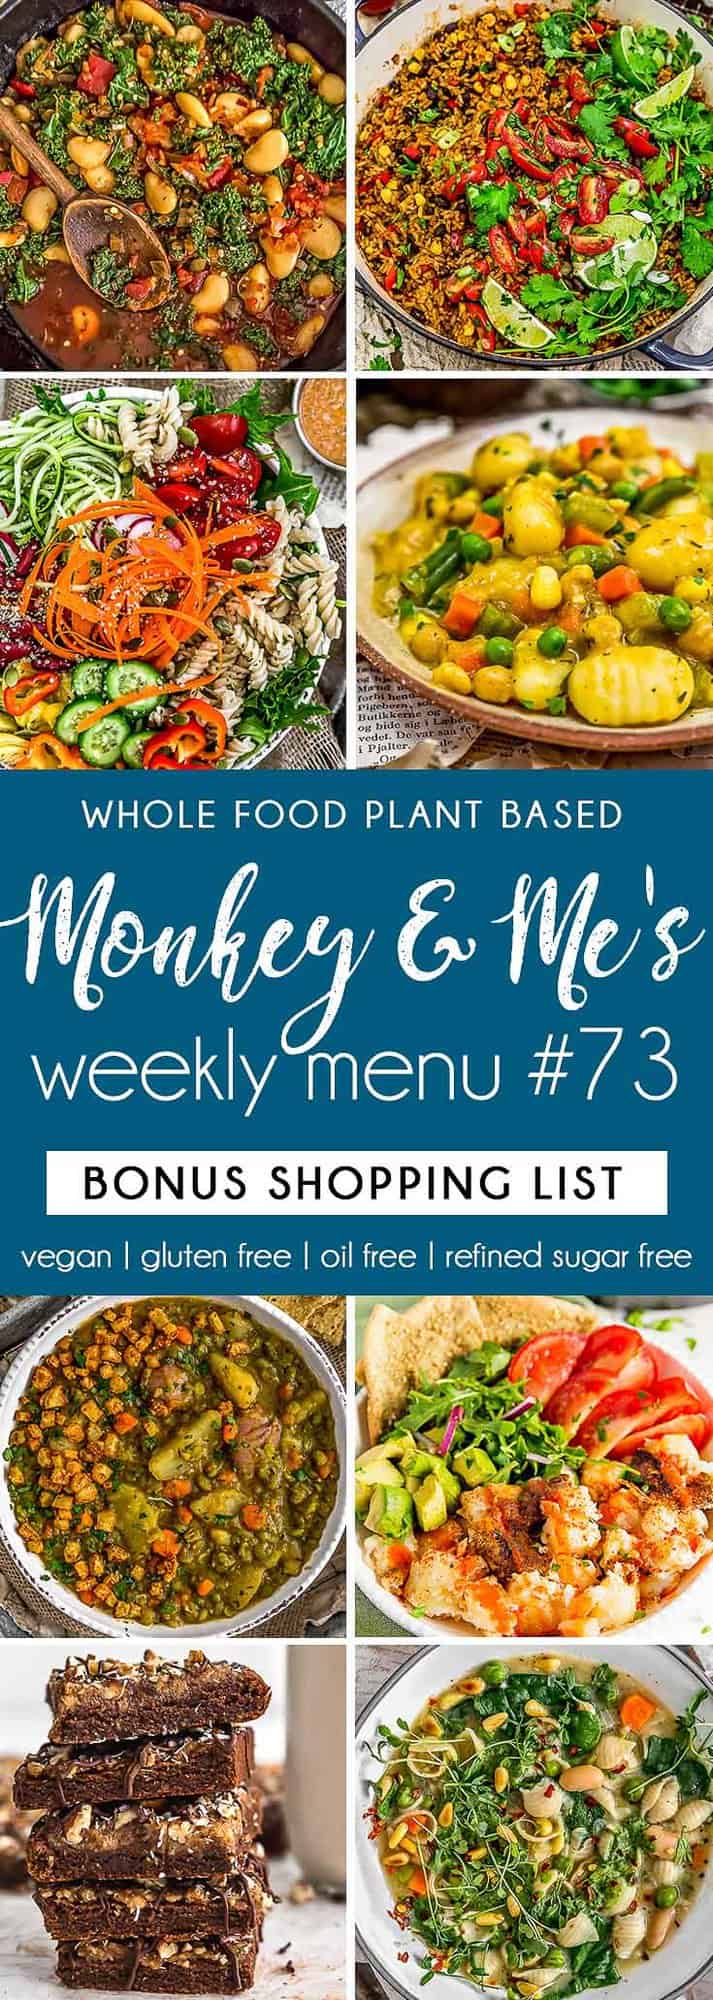 Monkey and Me's Menu 73 featuring 8 recipes